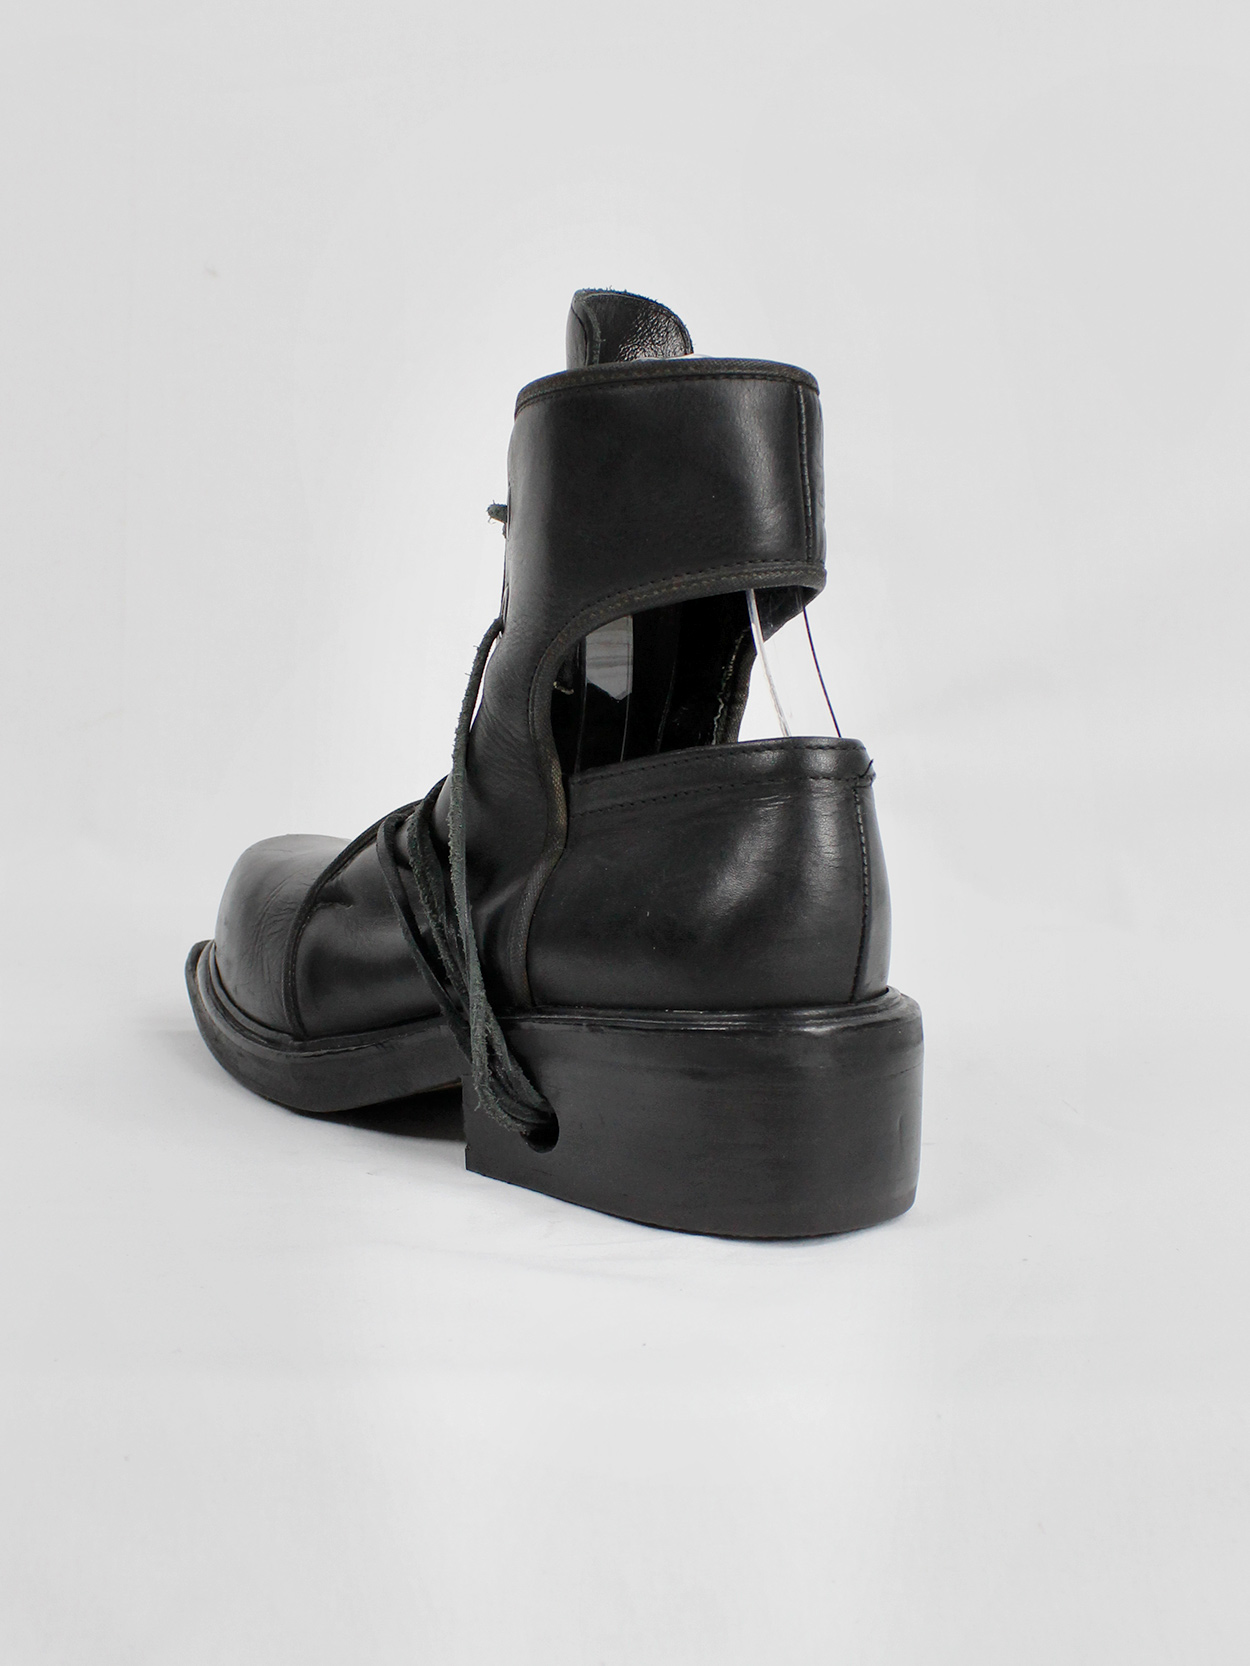 Dirk Bikkembergs black cut out mountaineering boots with laces through ...